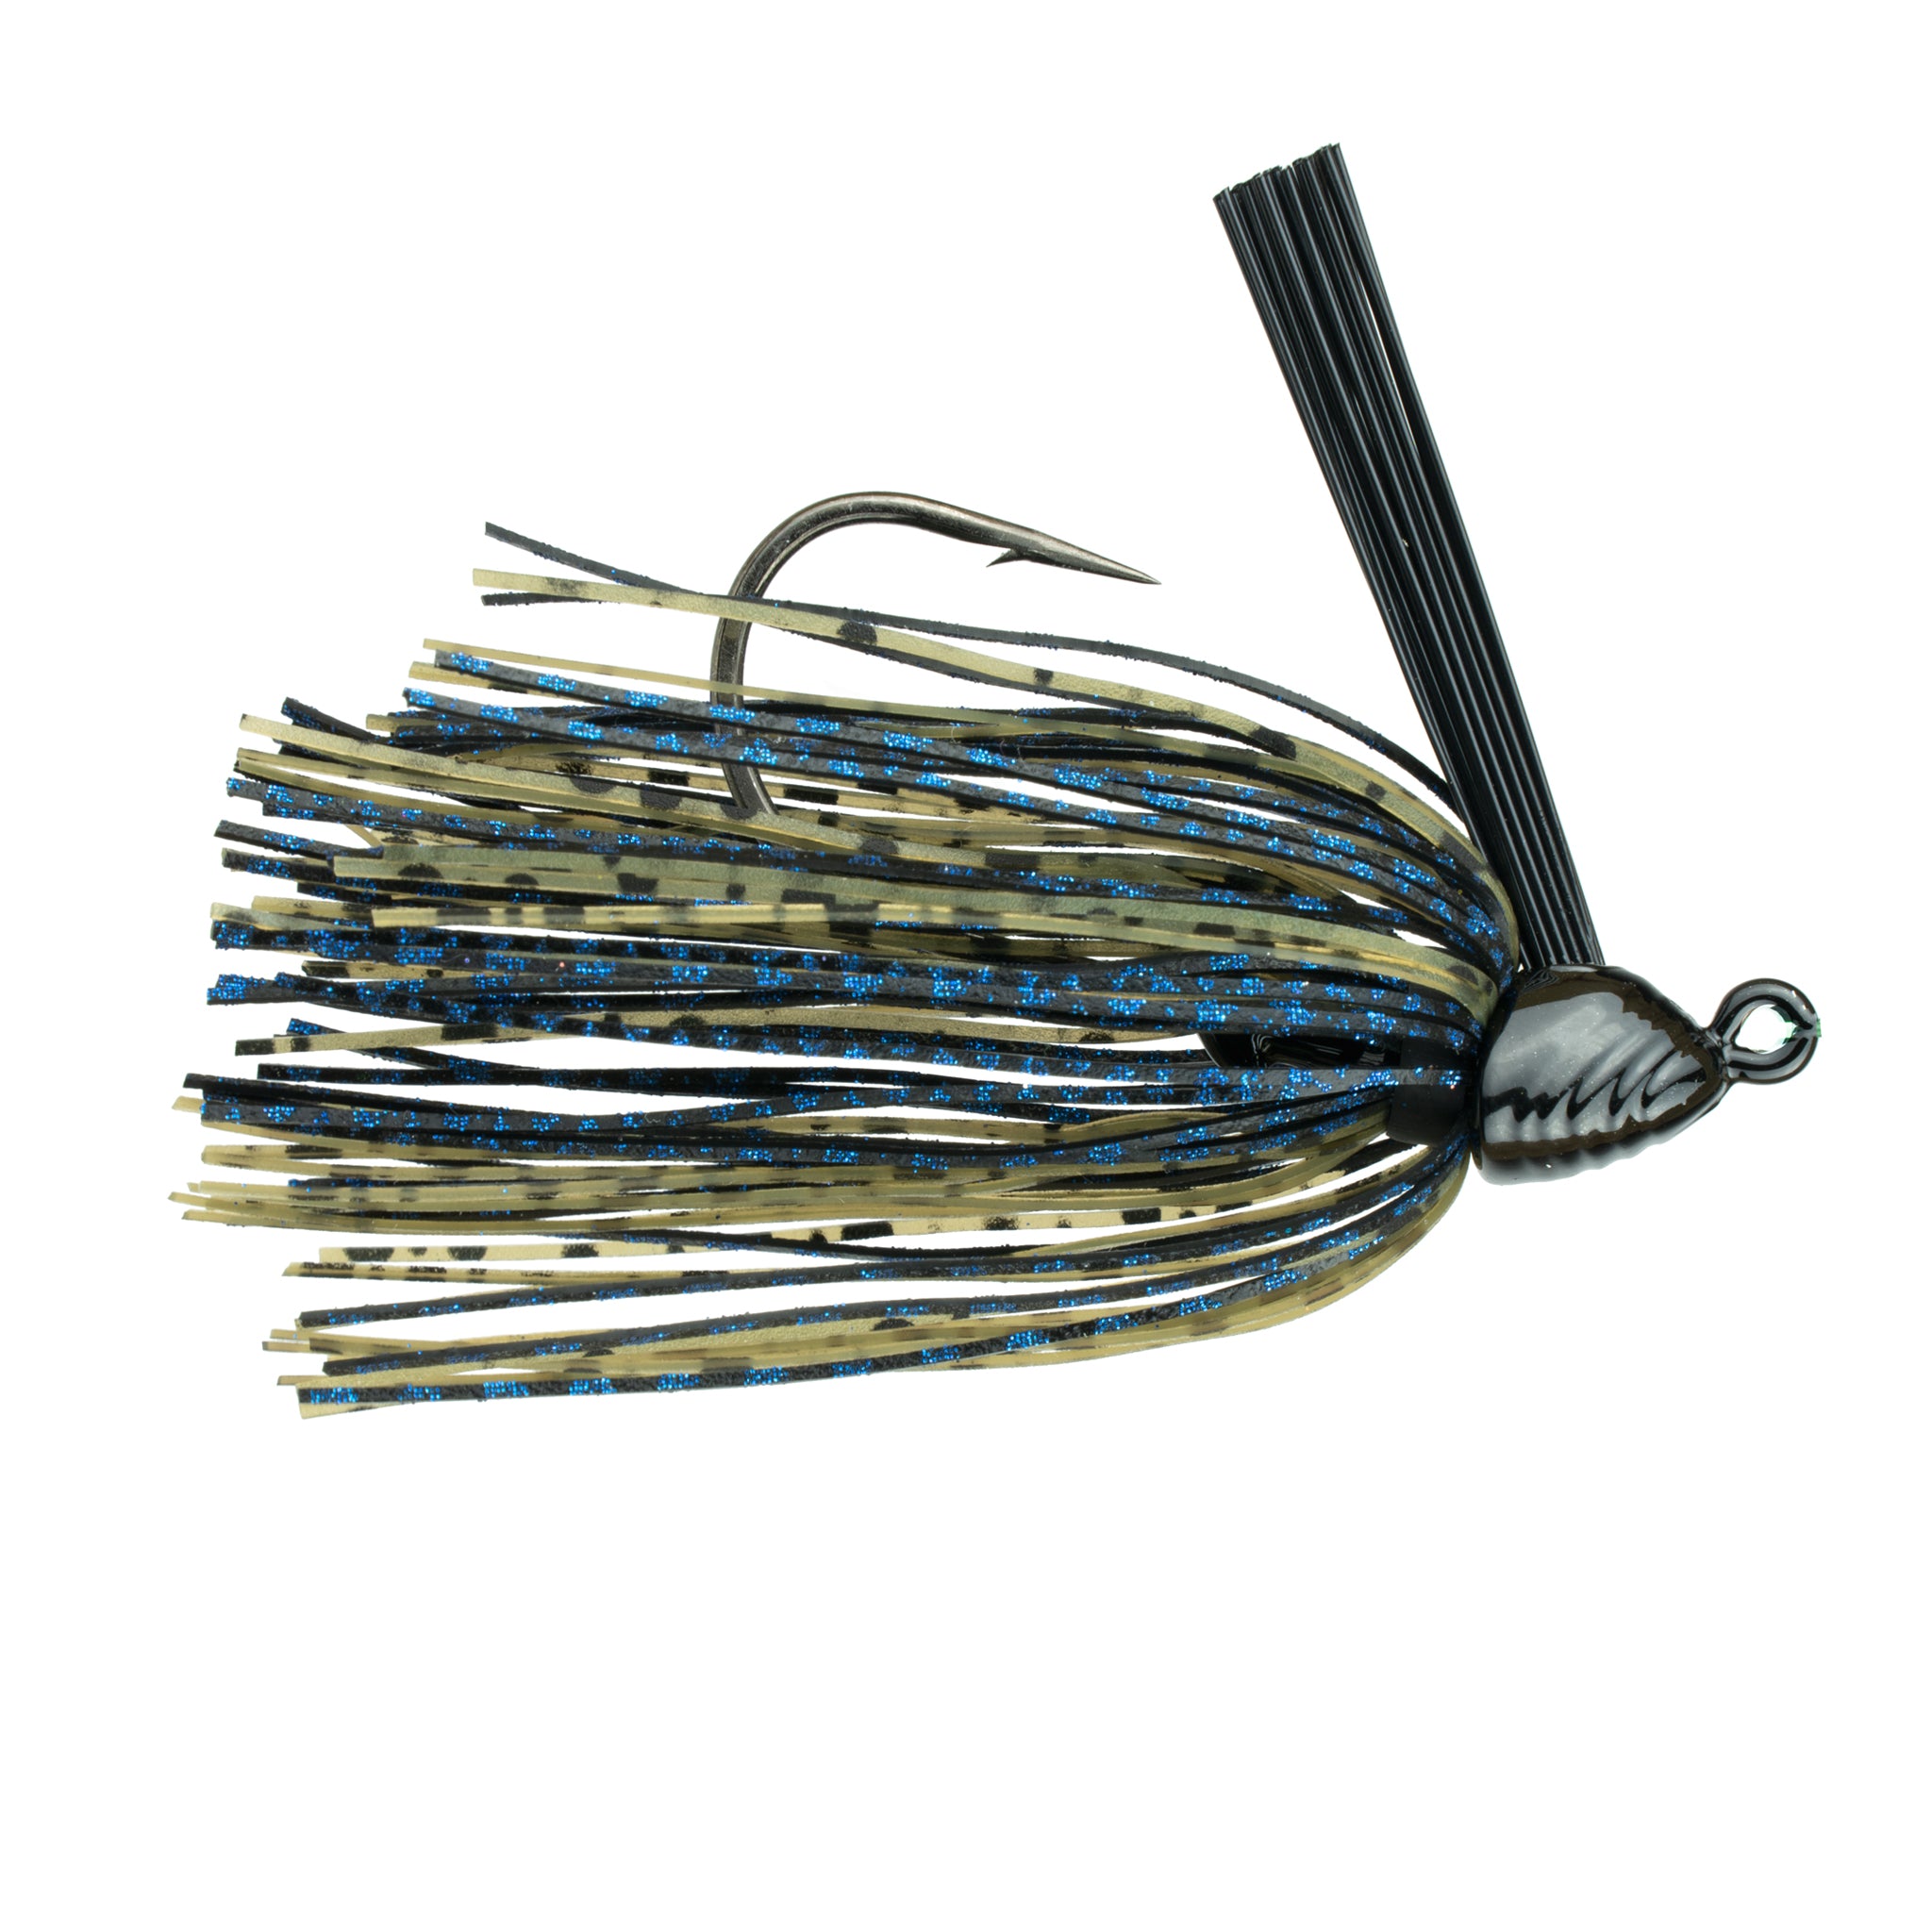 Strike King Tourgrade Tung Slither Rig Skirted Jig, 51% OFF